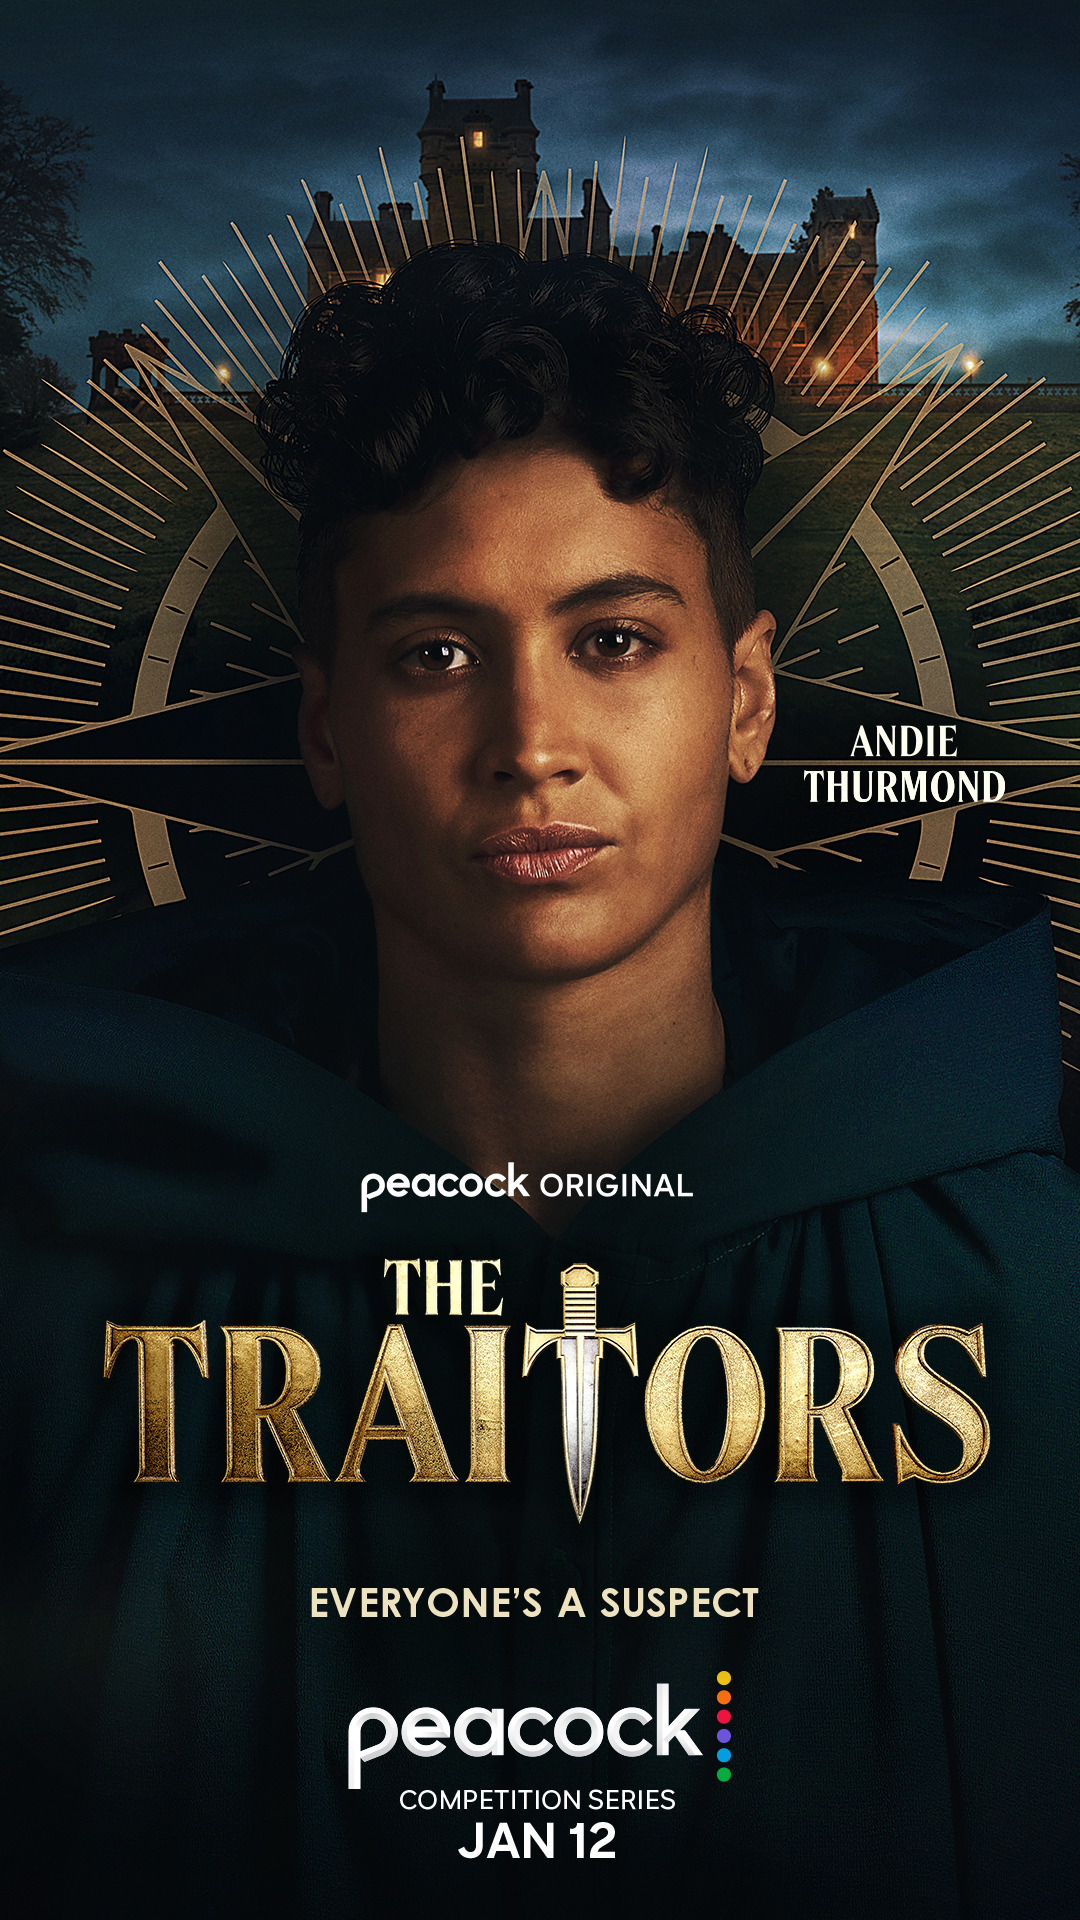 Andie Thurmond for 'The Traitors'